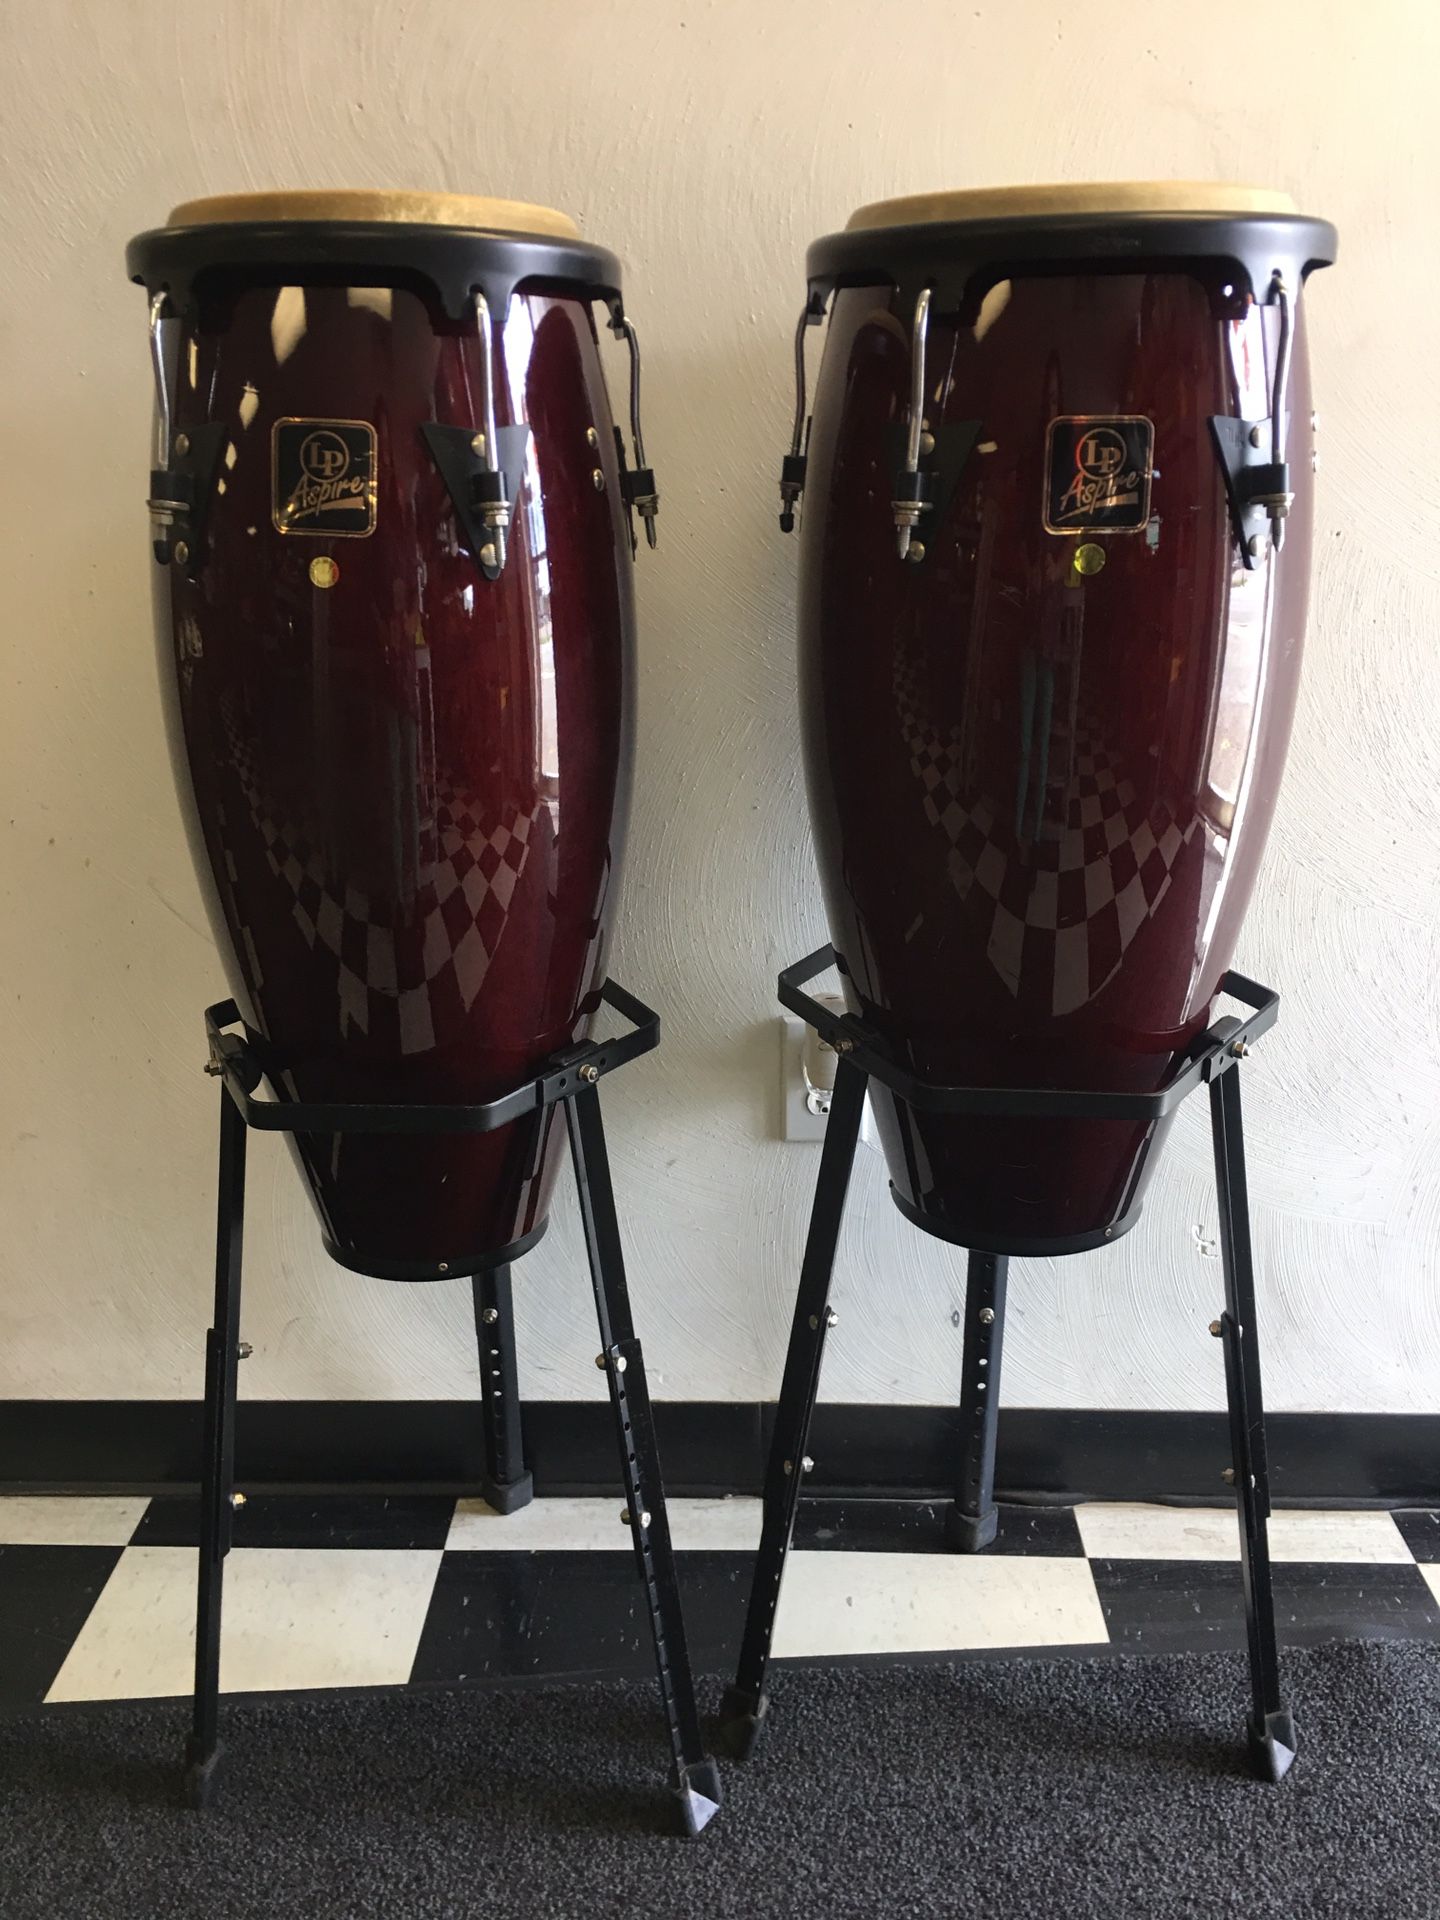 LP ASPIRE Latin Percussion Congas/Drums (12” and 13”) w/ Stands - Pair - $325